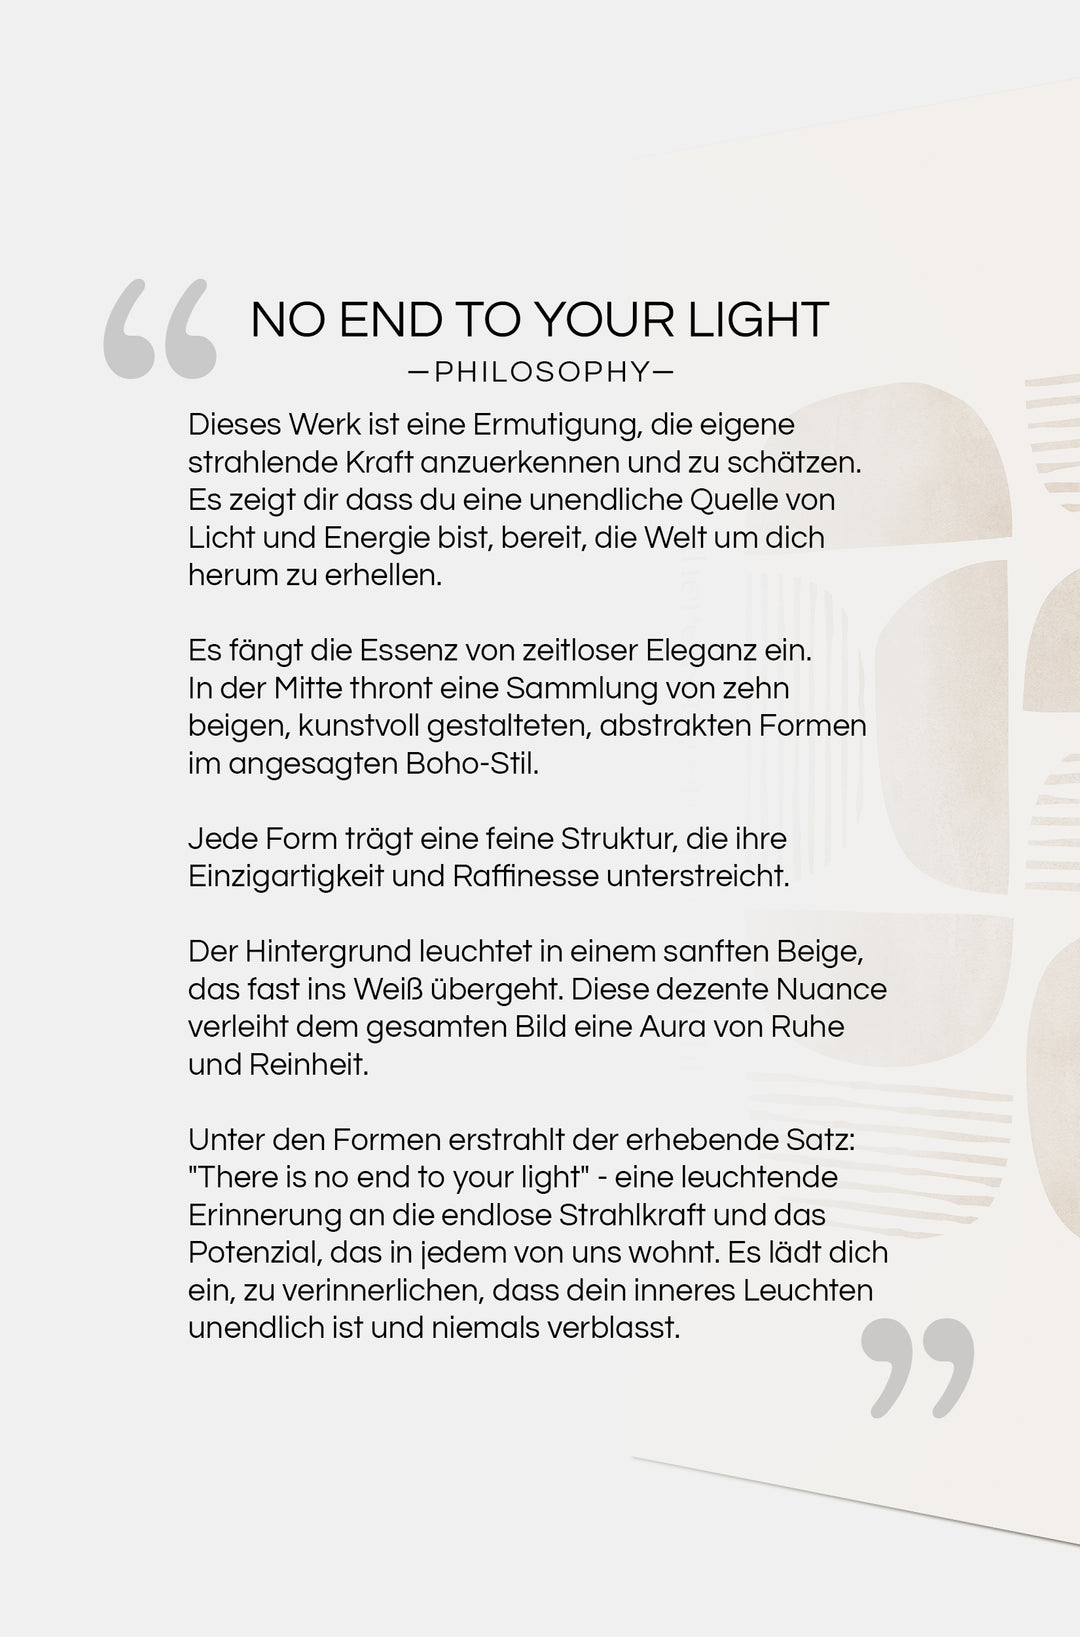 DUOVision There so no End to your Light - 2in1 Poster